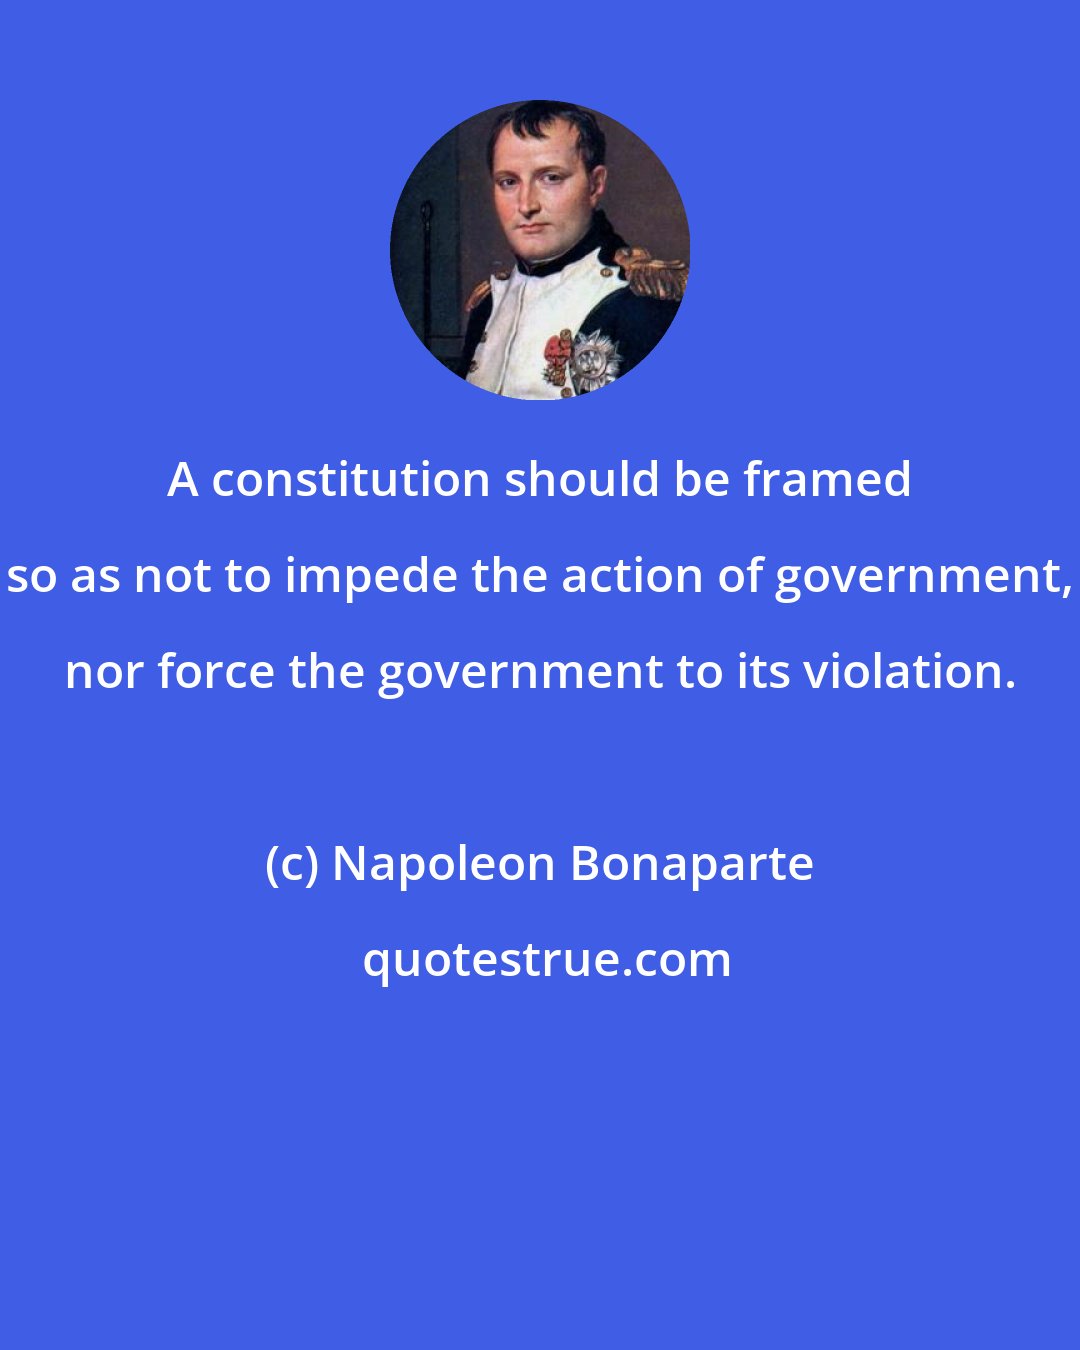 Napoleon Bonaparte: A constitution should be framed so as not to impede the action of government, nor force the government to its violation.